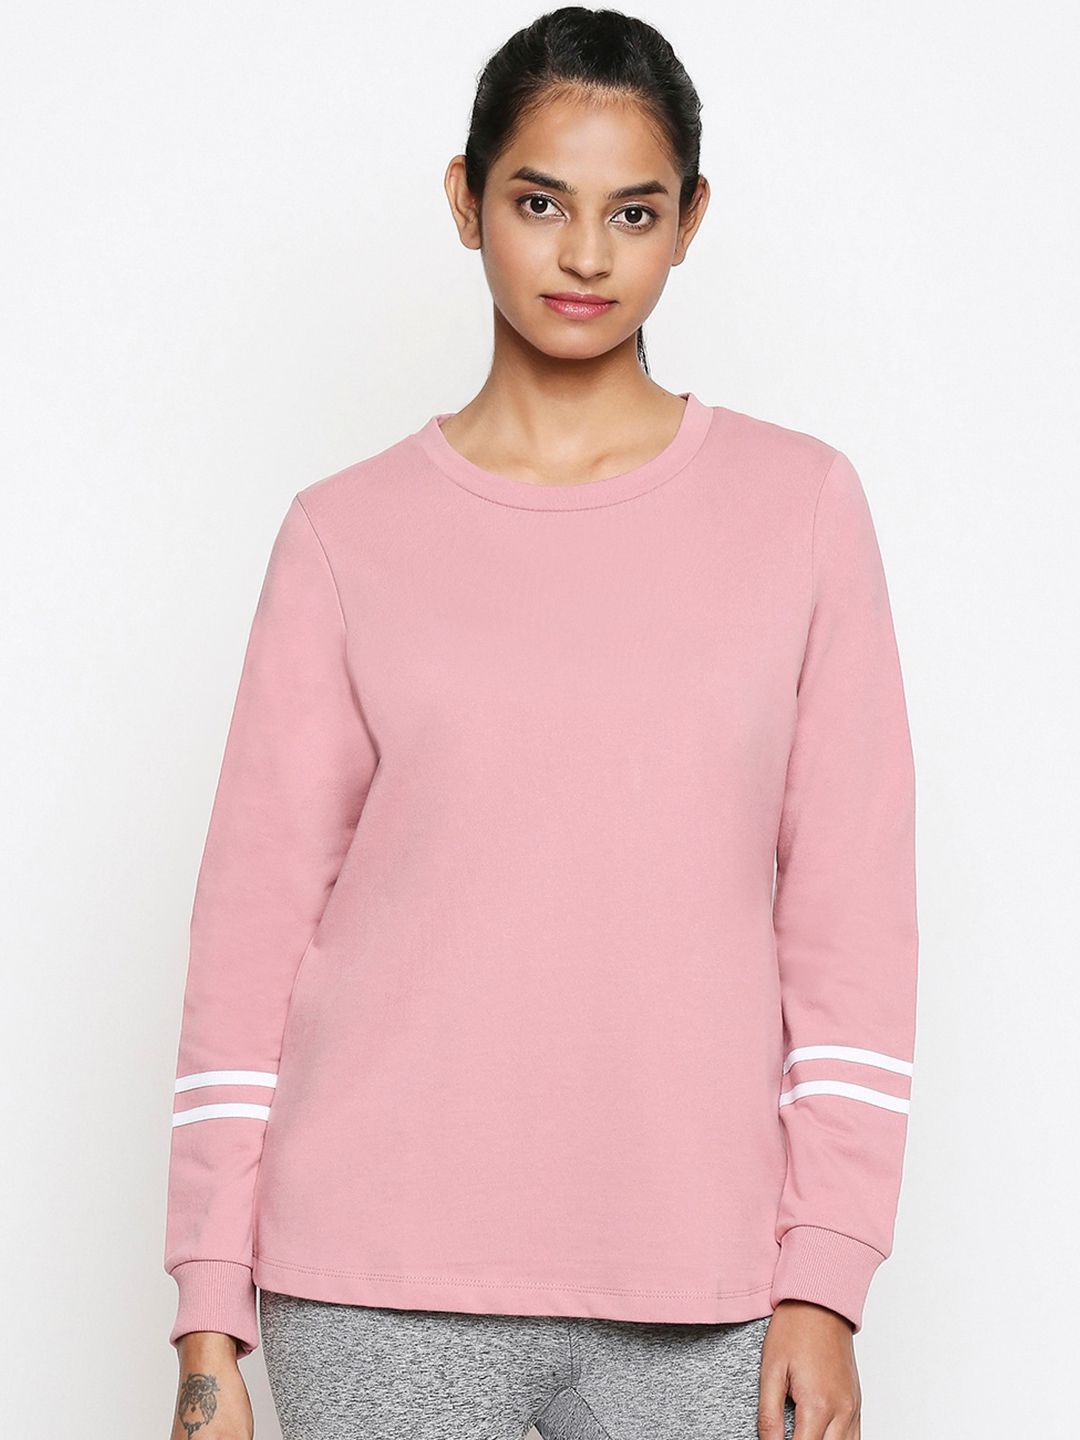 Ajile by Pantaloons Women Pink Solid Cotton Sweatshirt Price in India